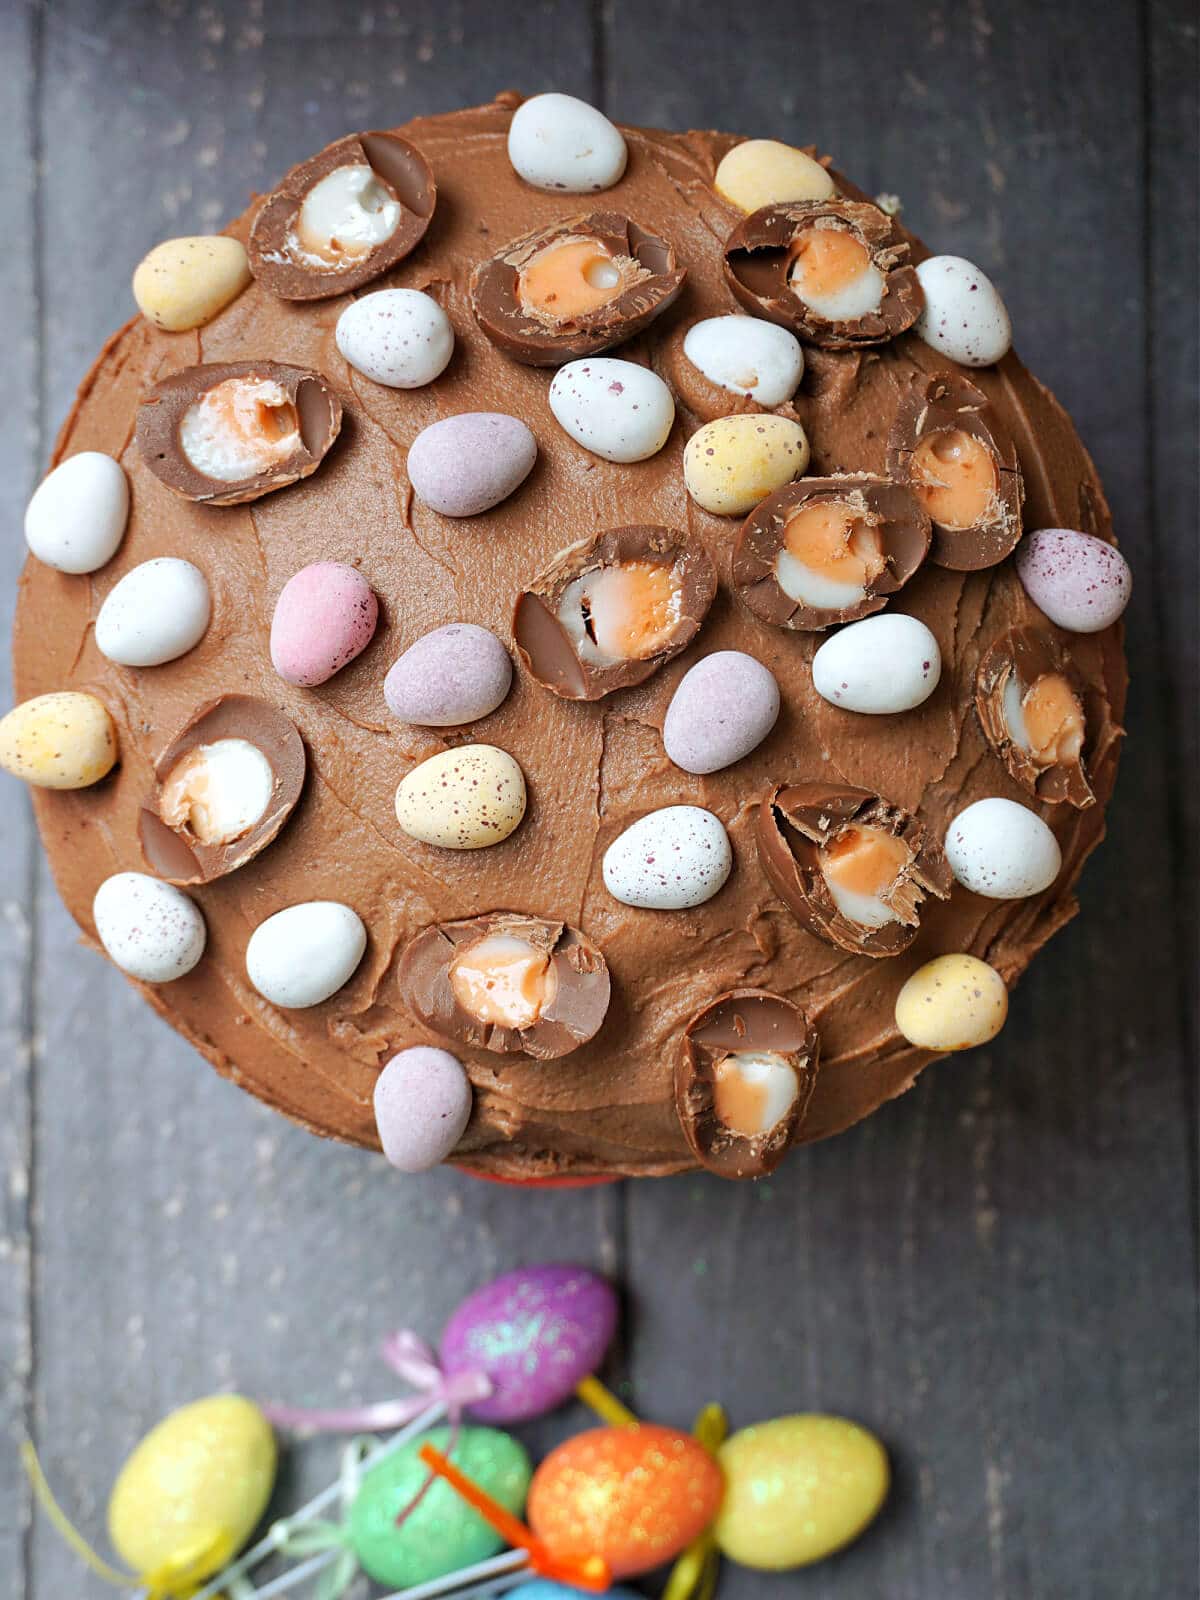 Overhead shoot of a chocolate cake topped with Easter eggs.